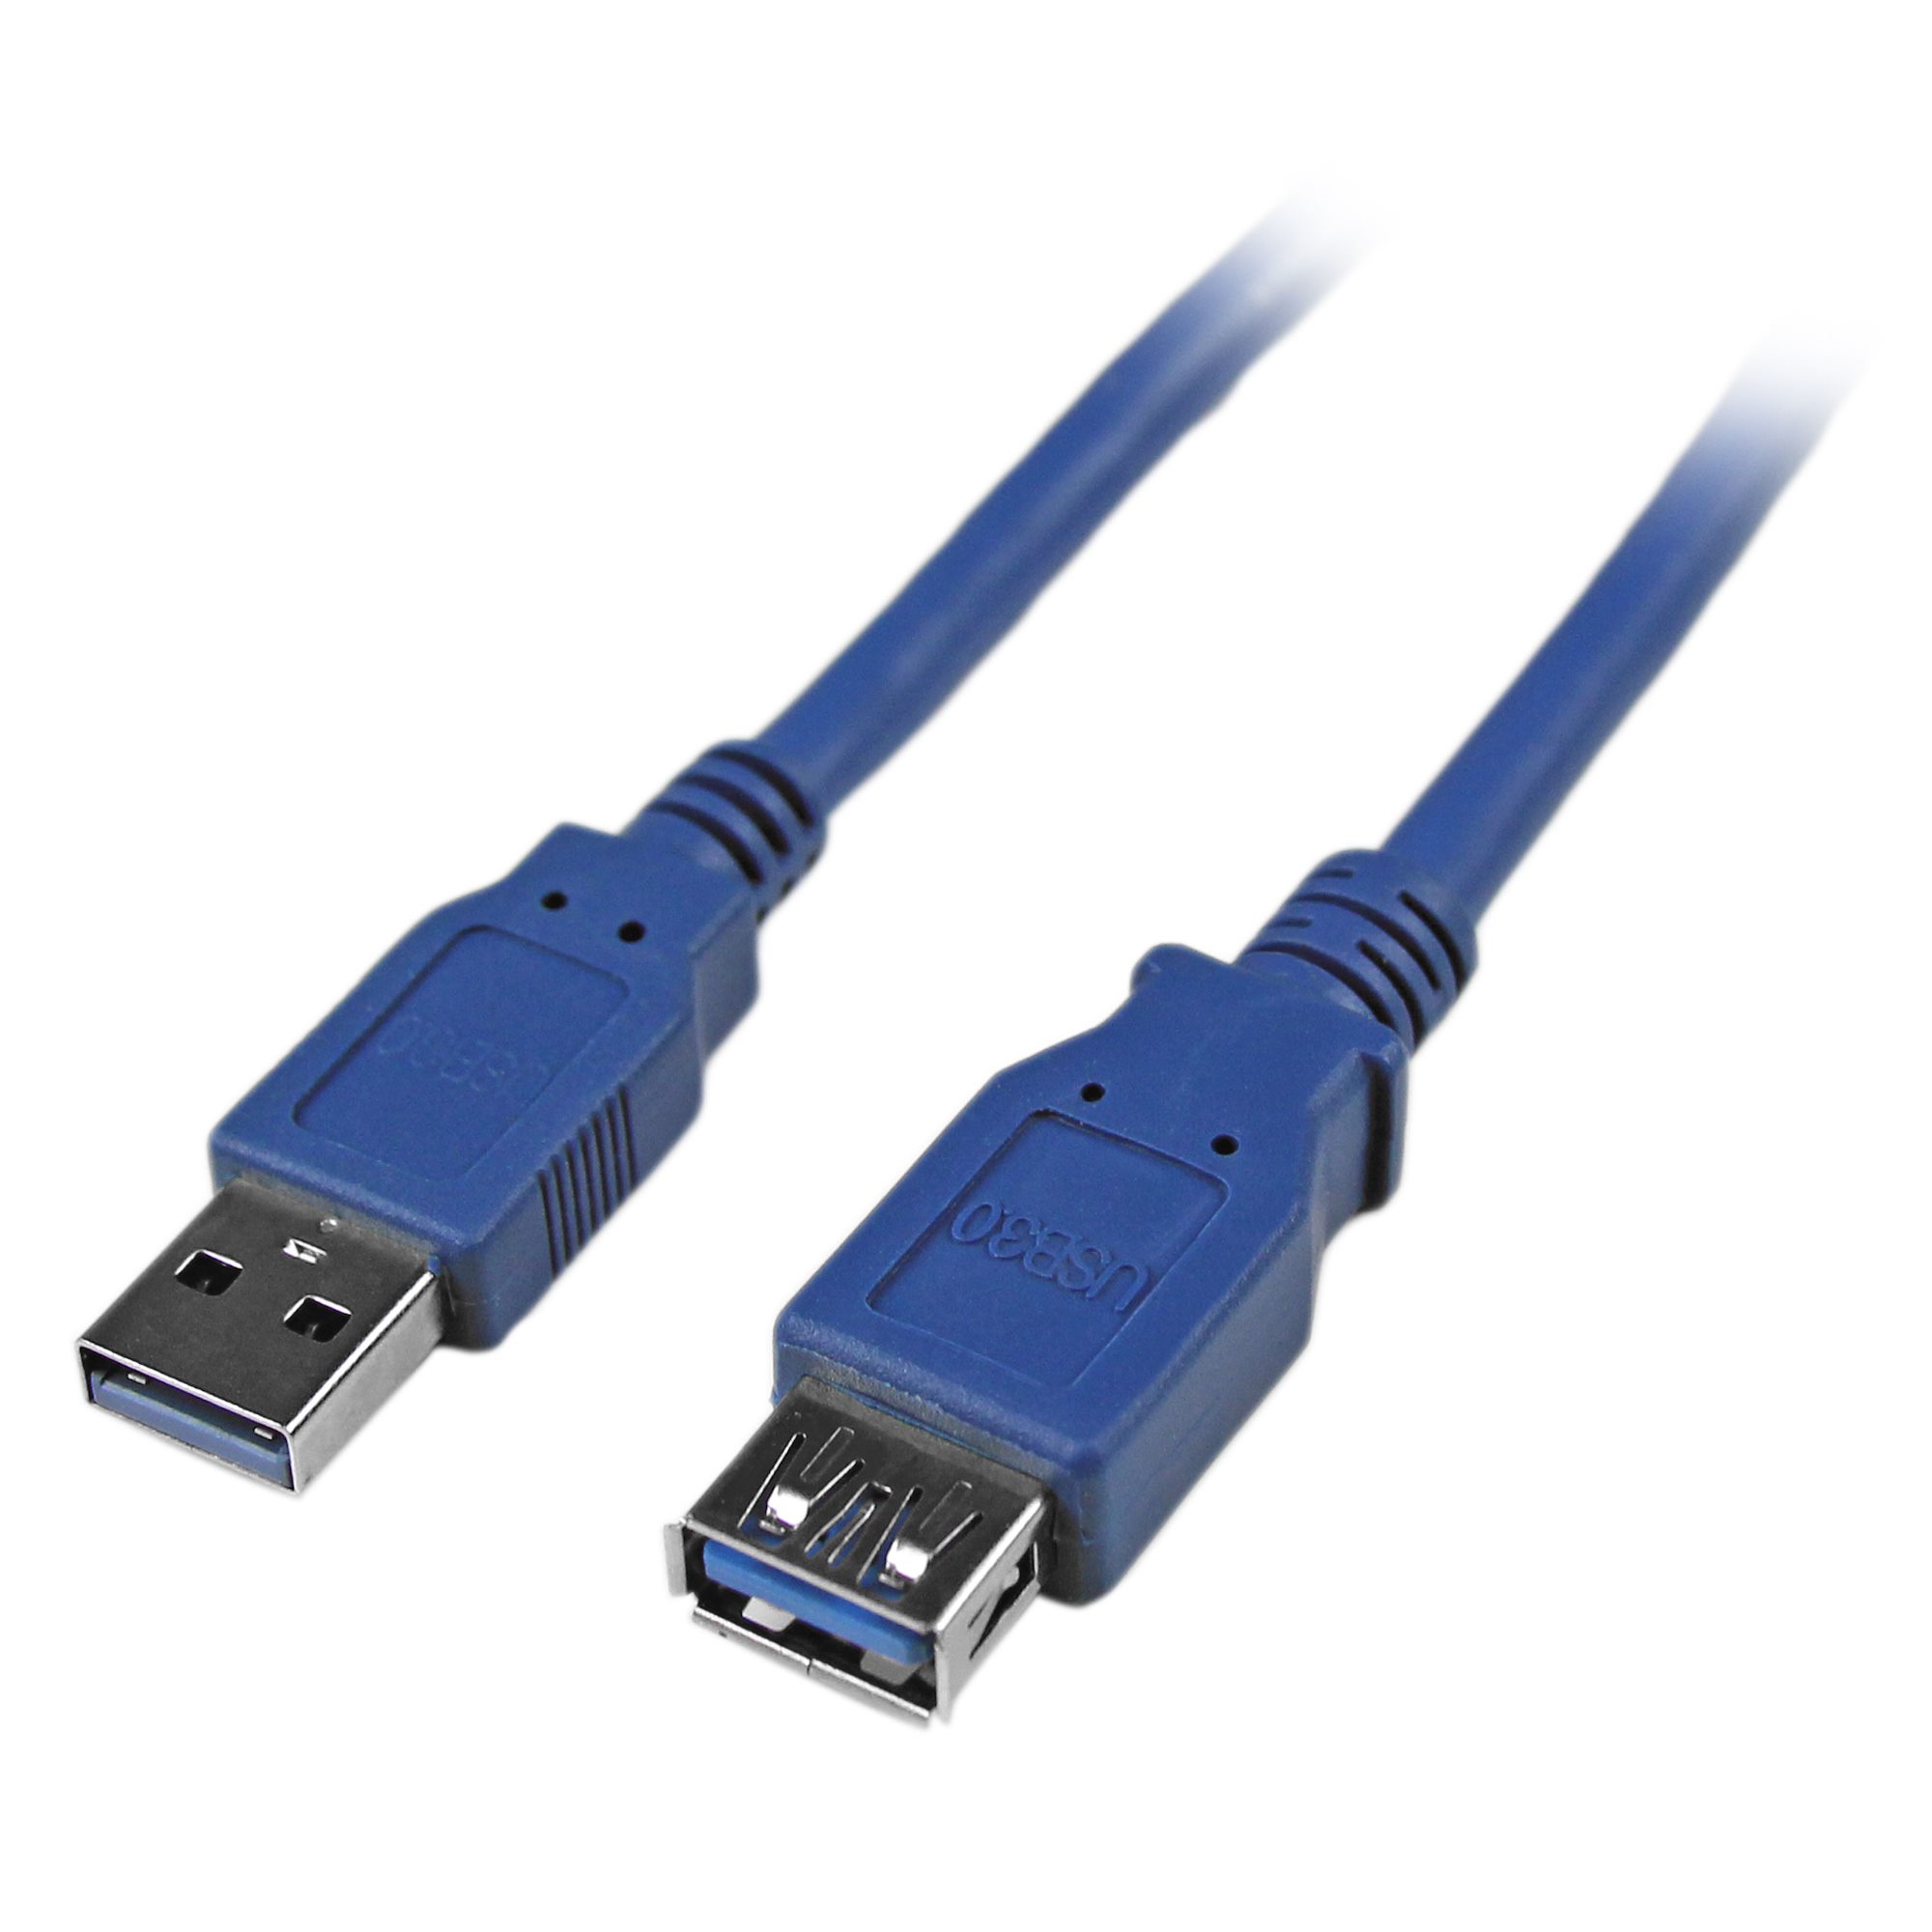 Blue Premium Quality USB 3.0 Type A Male to Type A Female Extension Cable 3 FT